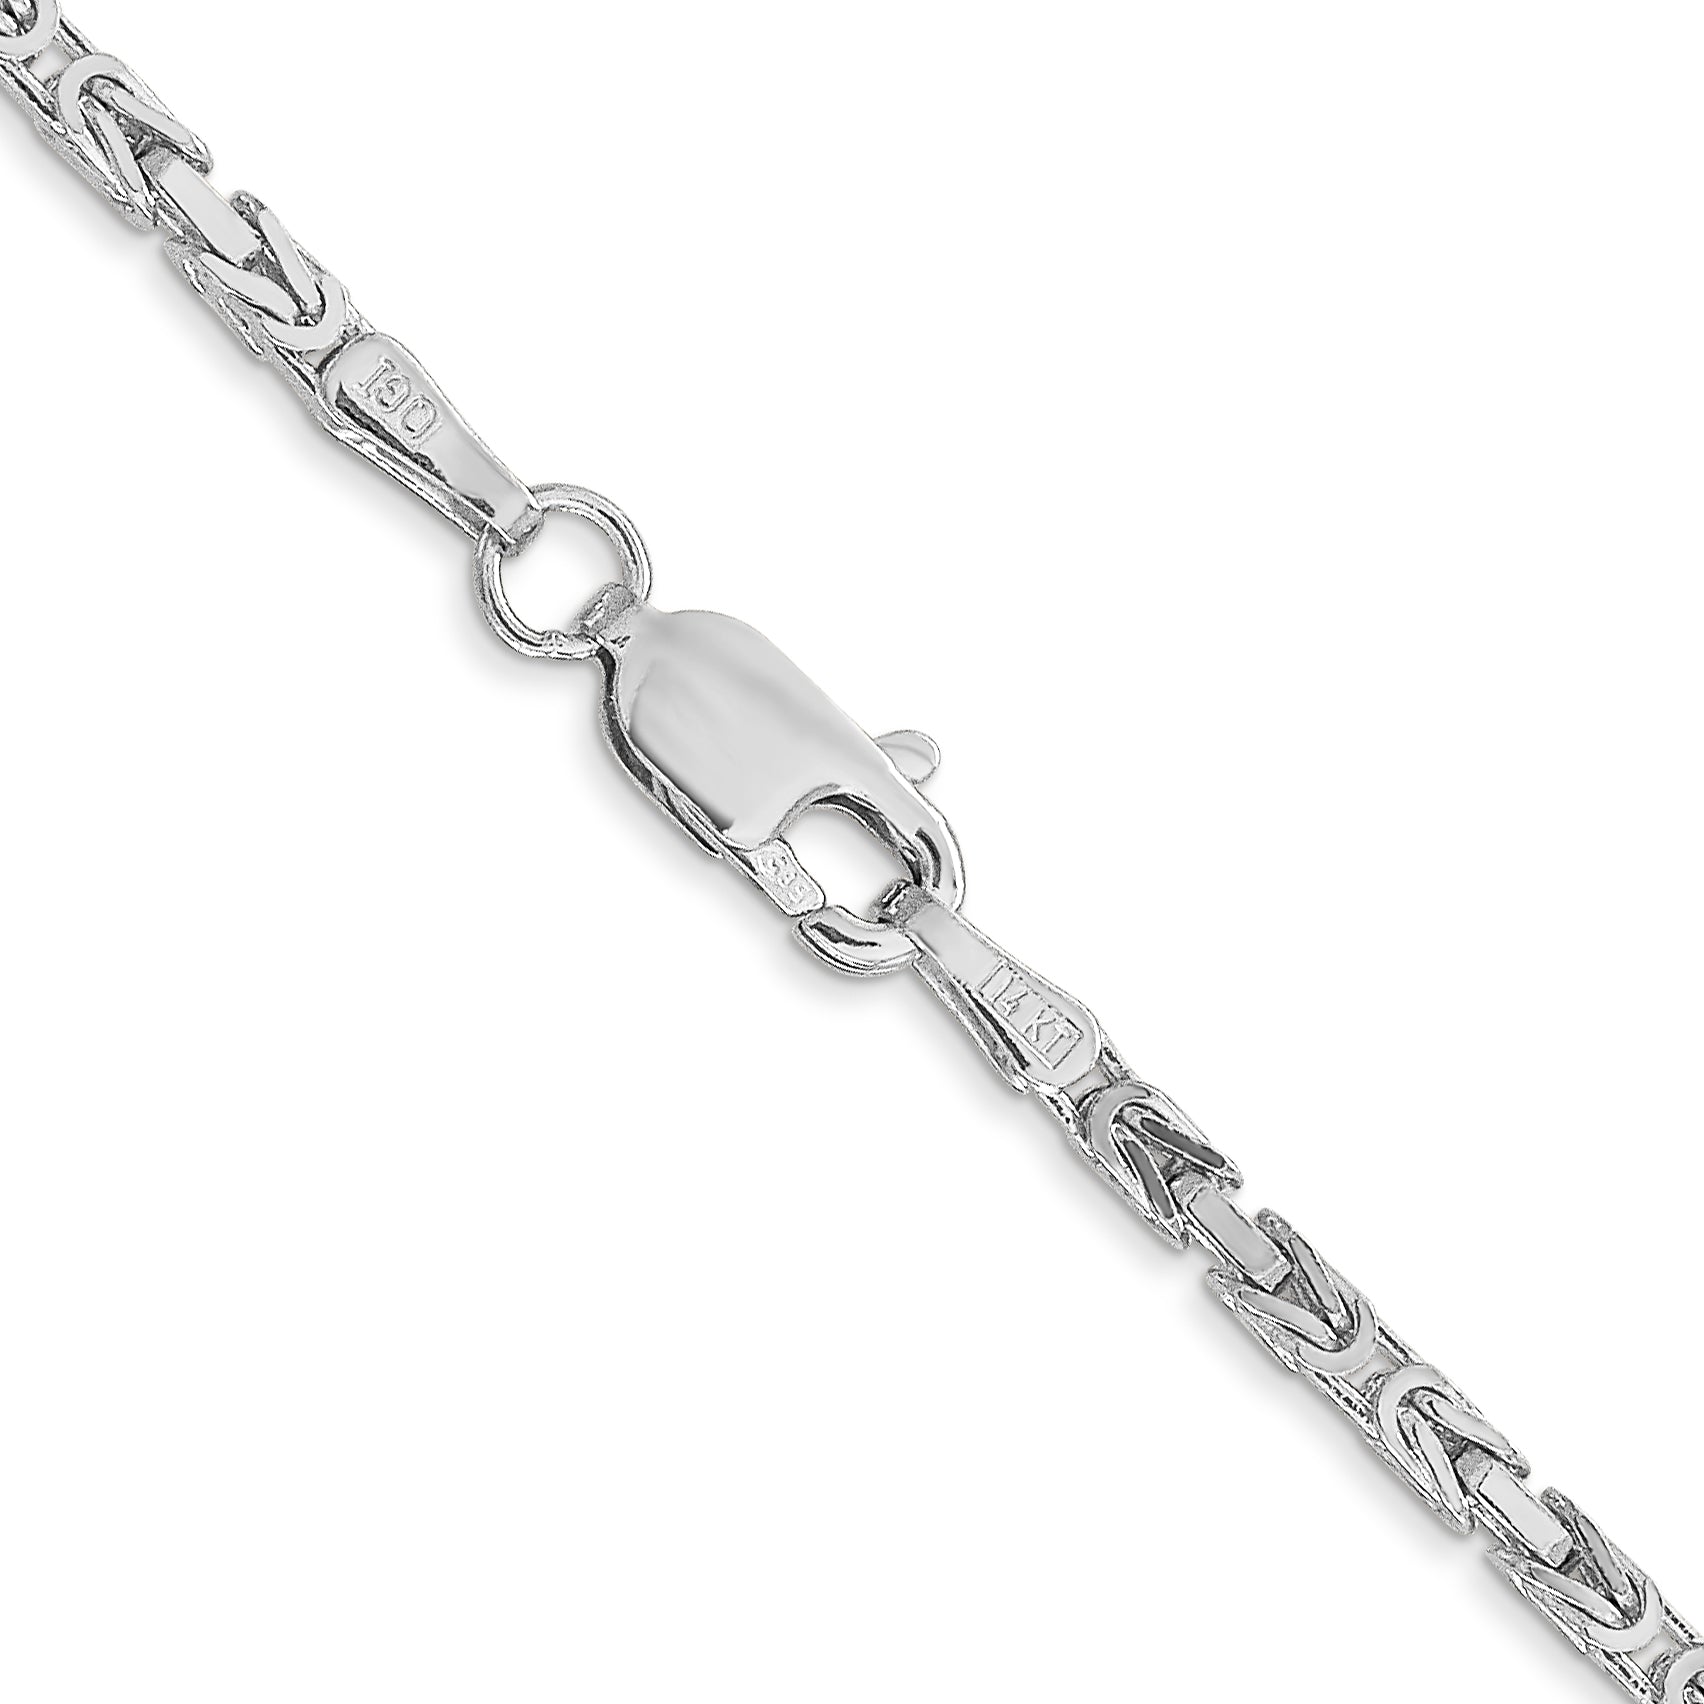 14K White Gold 16 inch 2mm Byzantine with Lobster Clasp Chain